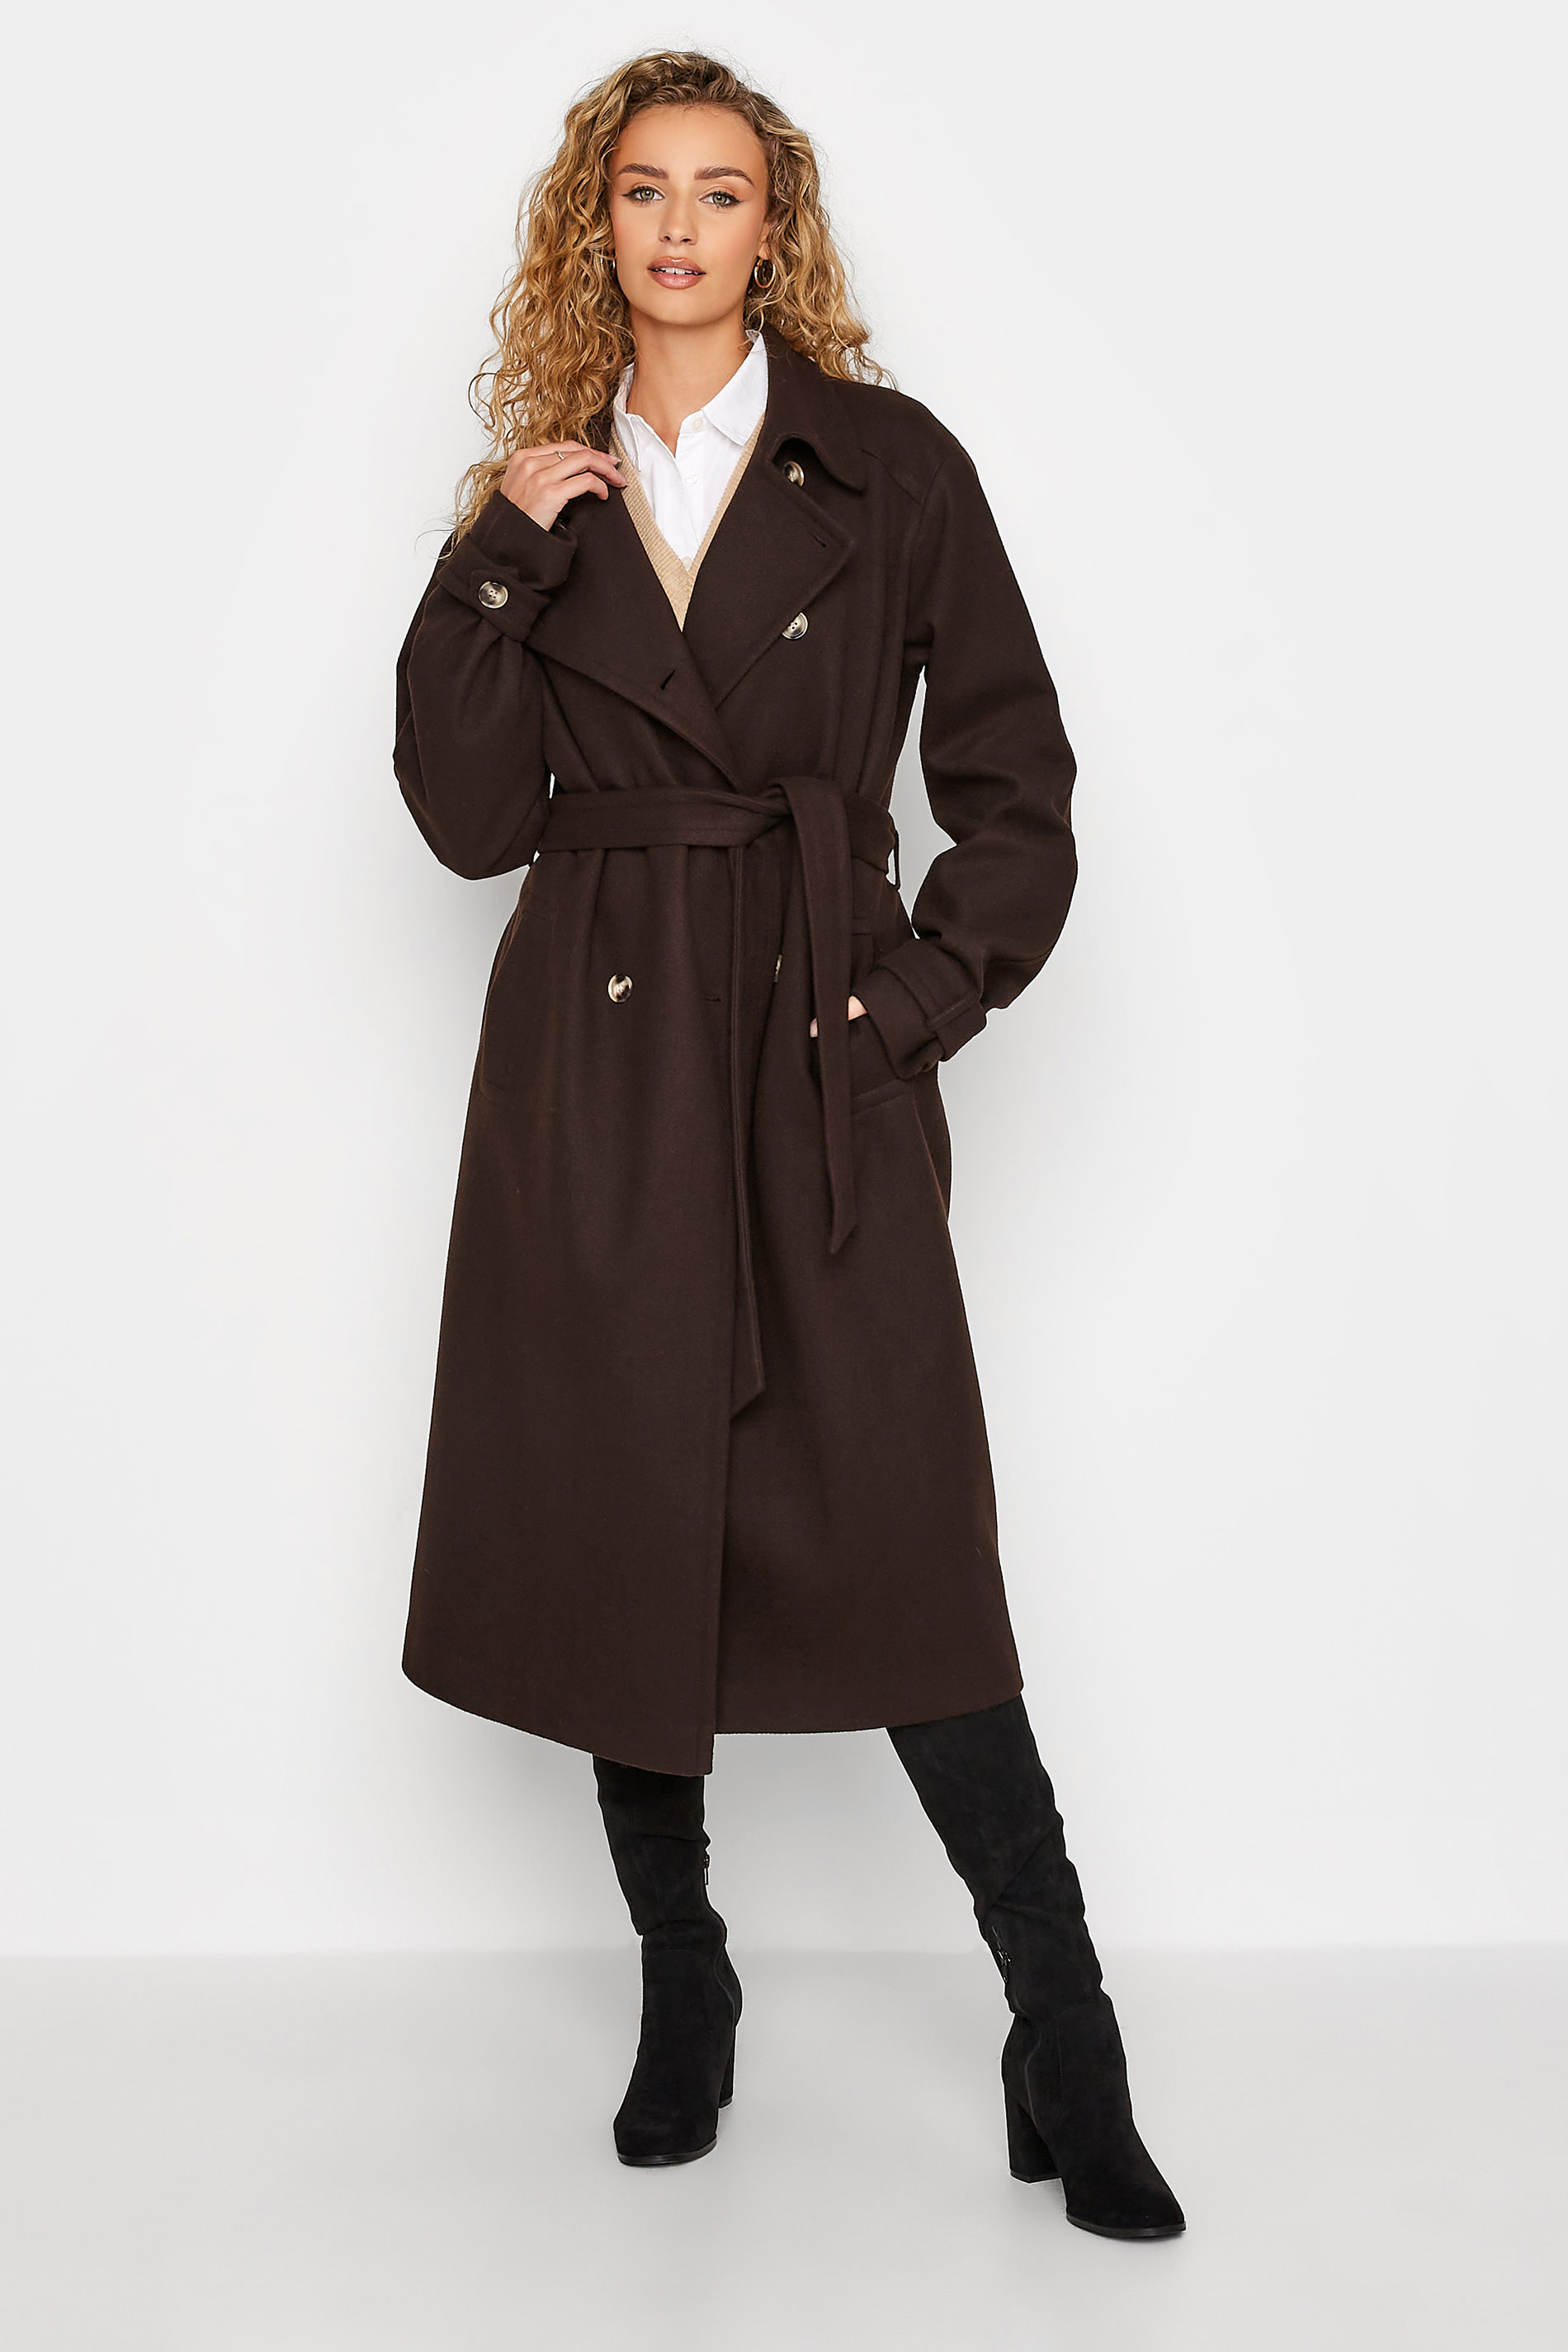 LTS Tall Chocolate Brown Formal Trench Coat 1